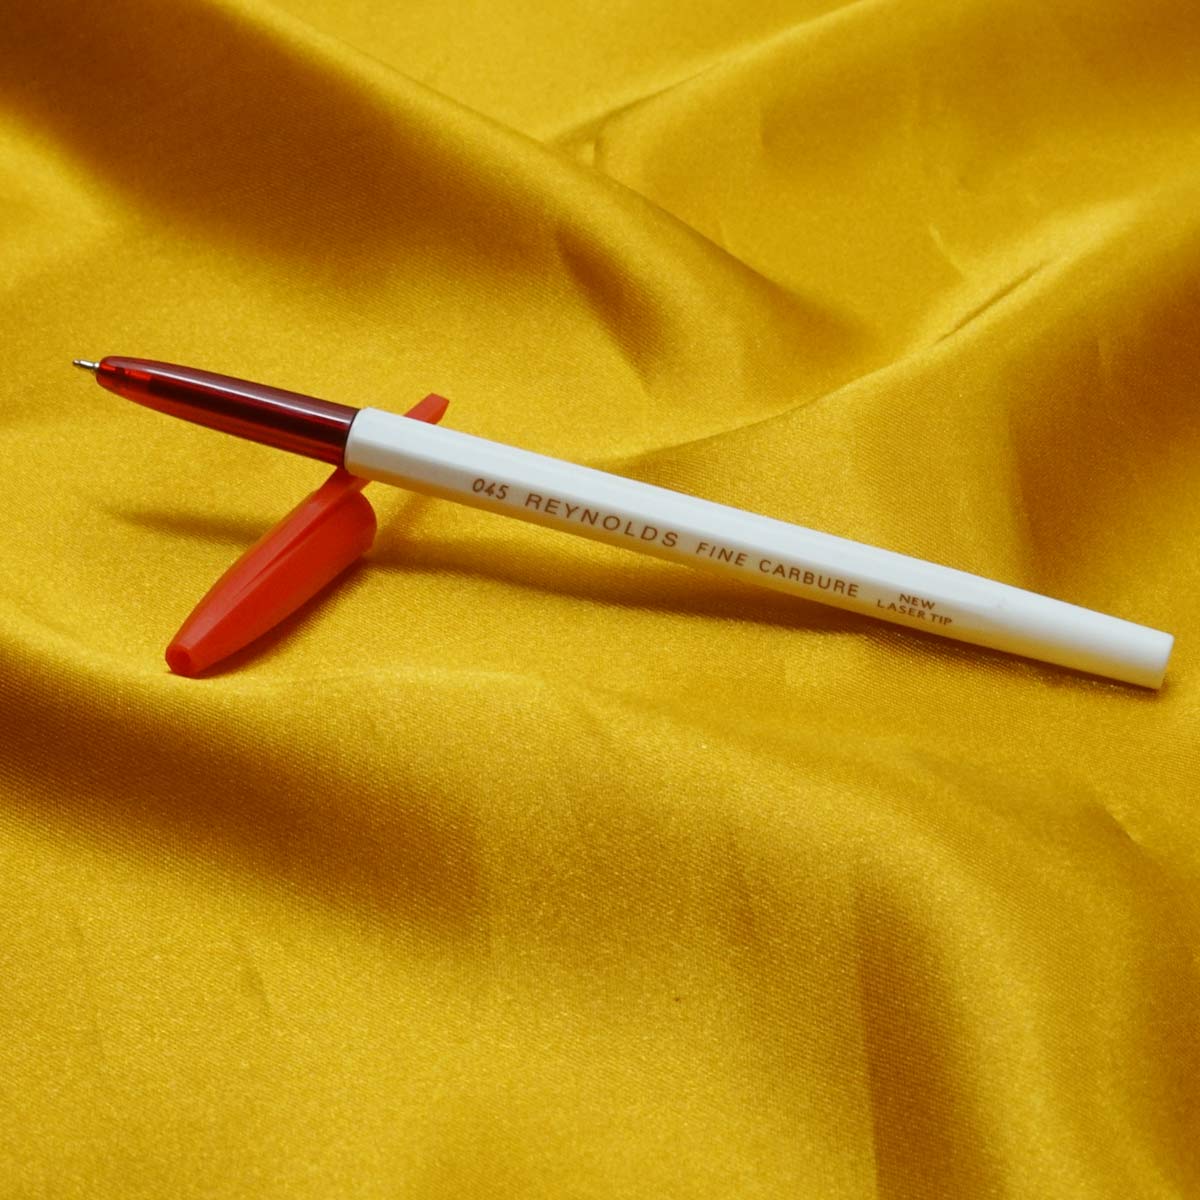 Reynolds 045  Fine carbure white body with Red Cap Type Ball Pen  SKU 11986